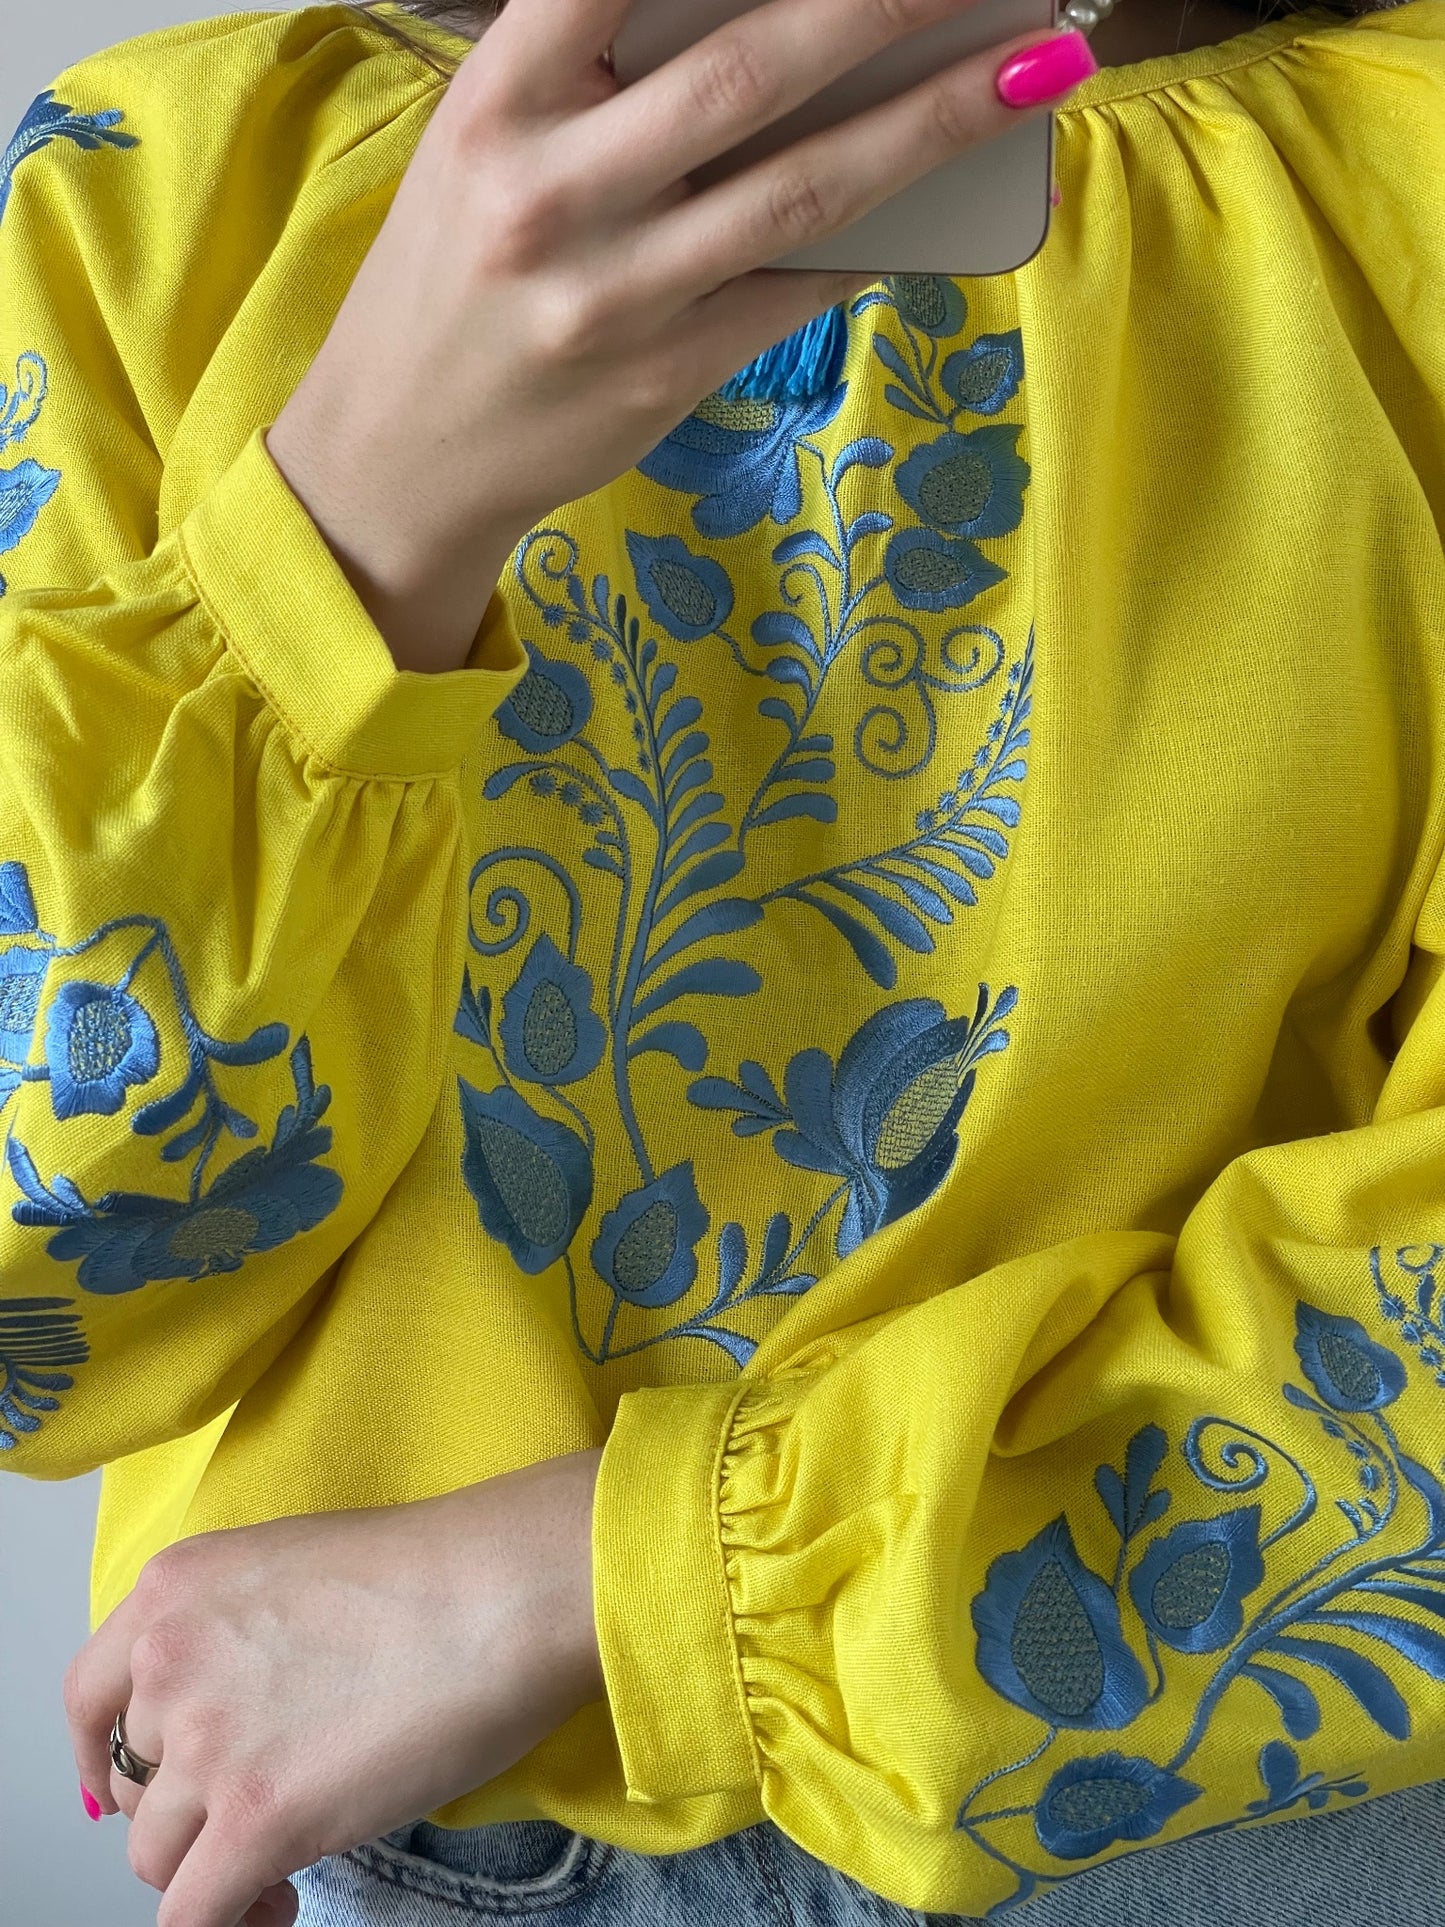 The Yellow Women's Blouse with Blue Embroidery